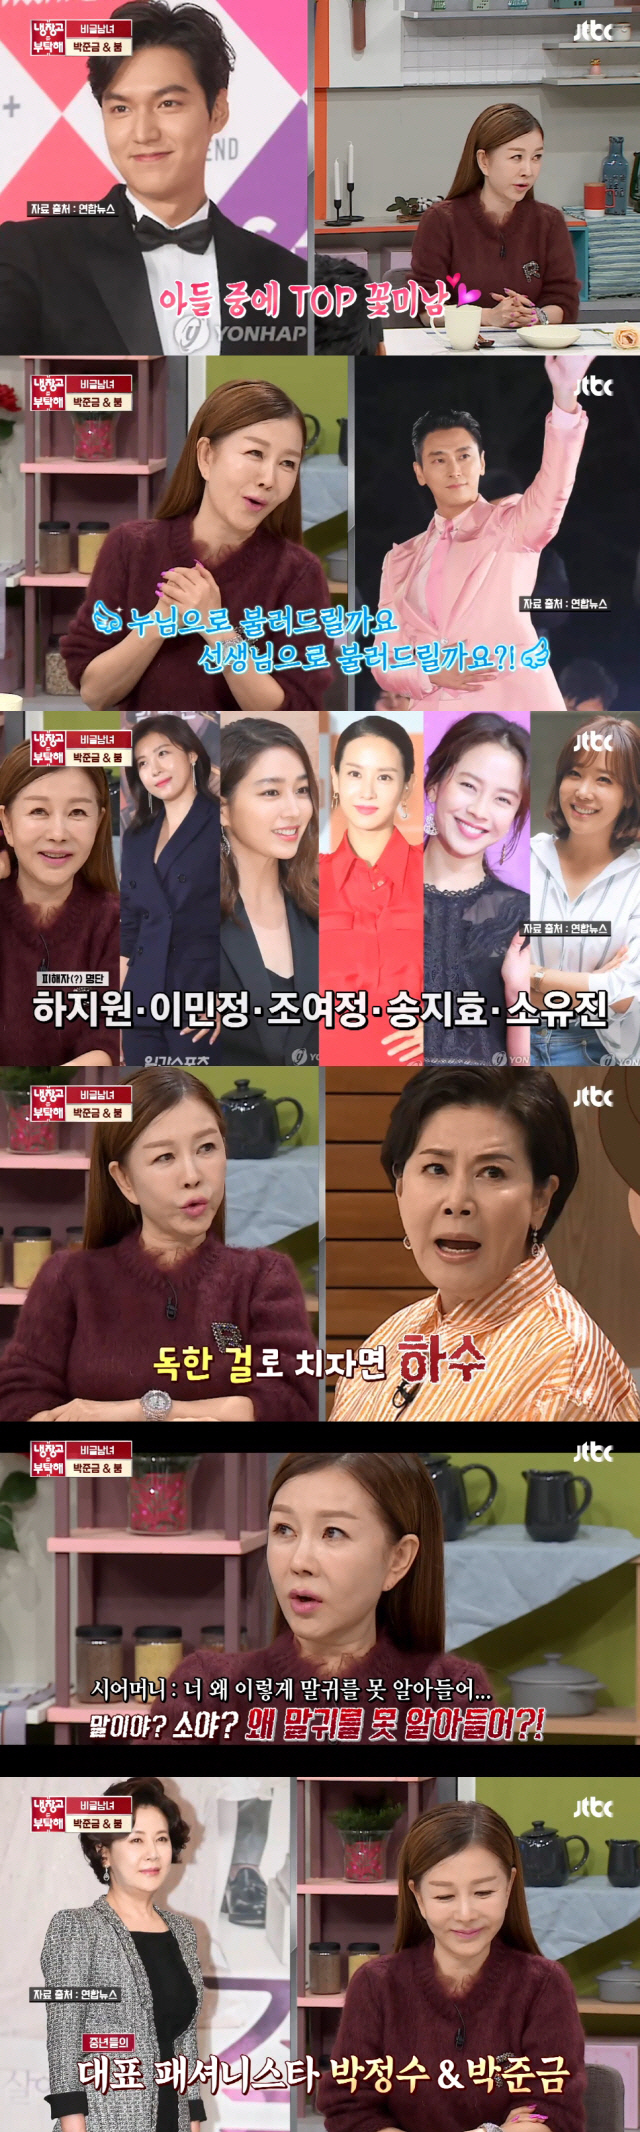 Size like 158, 43kg and IU, Park Jun-geums stunning body management secret was revealed.Actor Park Jun-geum and broadcaster Boom appeared on JTBC Take Care of the Refrigerator broadcast on the 28th.Especially on this day, Park Jun-geum attracted attention by revealing the thorough beauty habits for the slim body from the behind-the-scenes role of the top stars.Park Jun-geum said MC Kim Sung-joo is a top star guaranteed mother.Hyun Bin, Lee Min-ho, Choi Jin-hyuk, Ju Ji-hoon, etc. He said, There are friends who have come well, and there are friends who have met me well. Asked if he had an impressive son, he admired Lee Min-hos appearance and said, Hes handsome in close proximity, and handsome in the distance.Ju Ji-hoon has wit. As soon as he sees it, he says, Can I call you sister? Ill call you teacher? Its so attractive.I said, I like my sister, and from then on, I became a sister.Park Jun-geum revealed his amazing body specifications by saying he was 1m58 tall and 43kg in weight; he wears clothes the same size as IU.Park Jun-geum, who likes sweet food enough to like Chochung, said, I like sweetness, but I am trying to refrain from health.Park Jun-geum also says, If you think you have increased weight, you eat cabbage unconditionally. He also eats dried jujube as a substitute for cookies to avoid flour-containing cookies.I can not eat because of weight management, and there are chocolate cookies that I have for ornamental purposes. But I was off the diet for a while, enjoying the sweet and United States of America food thanks to the chefs.In the first cooking showdown on the theme of United States of America, Song Hoon chef and Raymon Kim chef confronted each other.Song Hoon chef presented meatball pasta and Raymon Kim chef presented Salisbury steak.All satisfactorily tasted, Park Jun-geum opted for a victory for Raymon Kim after agonising.In the second cooking showdown Soy sauce base dish, Chung Ho-young chef showed crab pot rice, beef soy sauce, butter seafood cream sauce nurungji risotto respectively.Park Jun-geum gave O chef a victory, saying, The rice cook is so delicious.